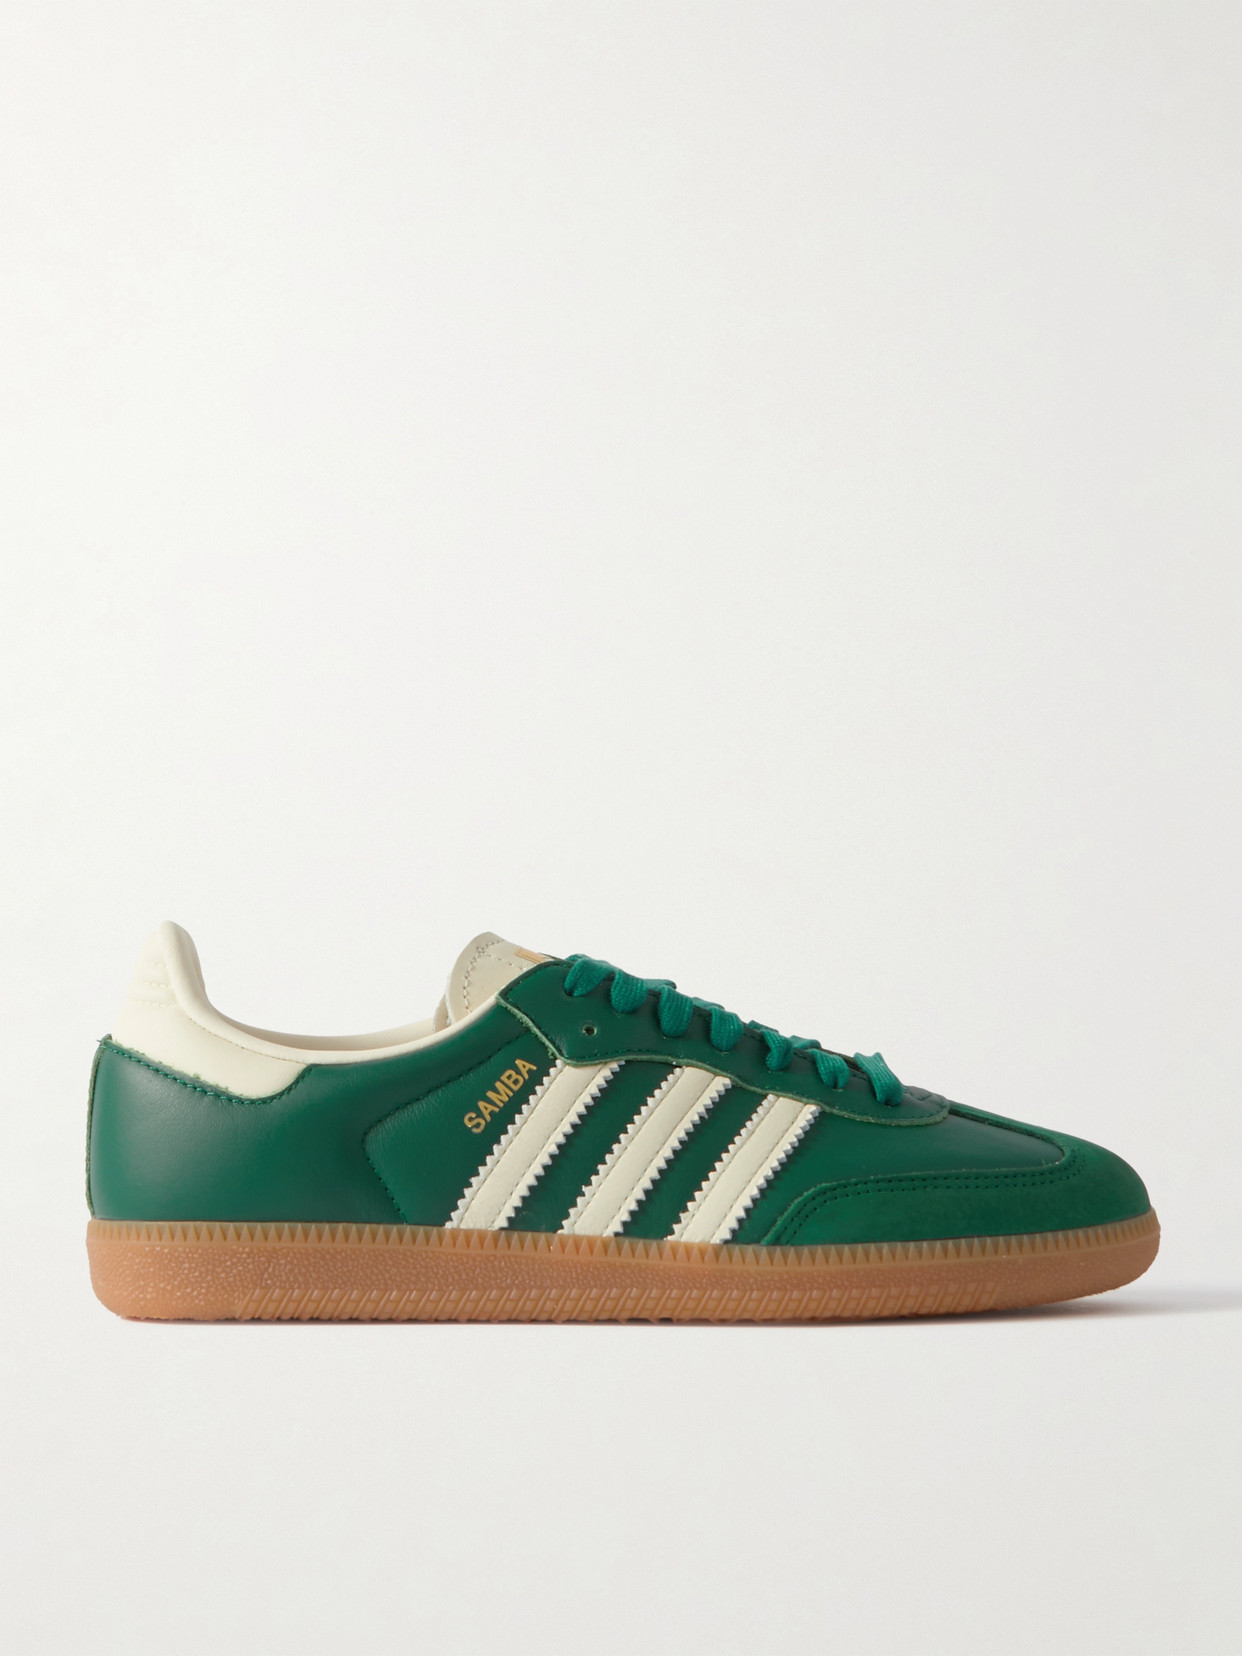 Samba Og Suede-Trimmed Leather Sneakers